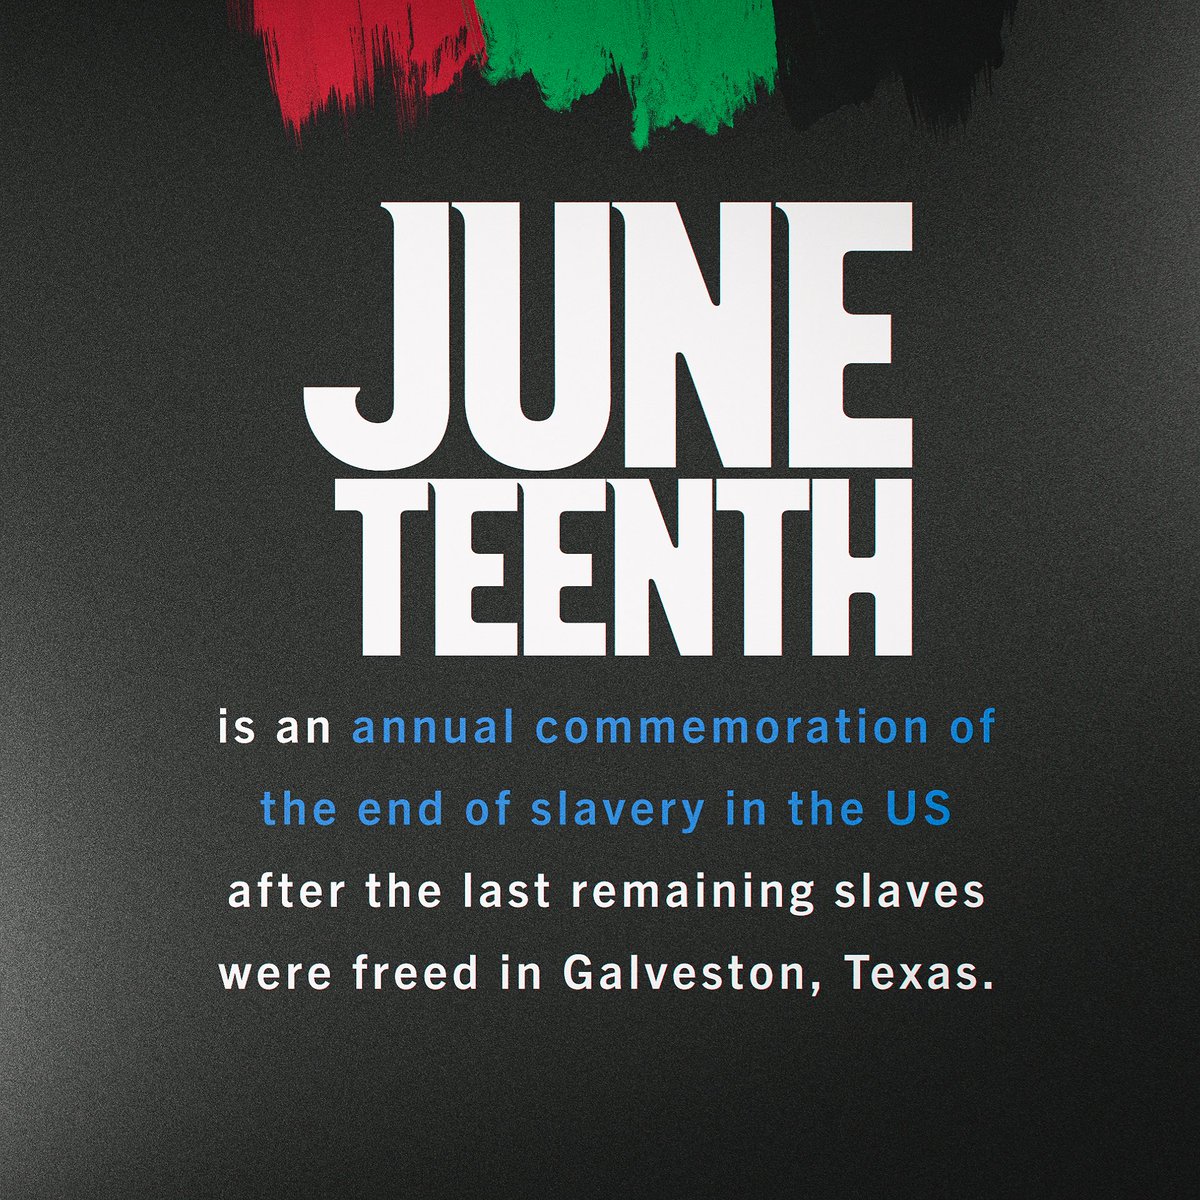 Happy Juneteenth! Juneteenth commemorates African-American freedom and emphasizes education and excellence.